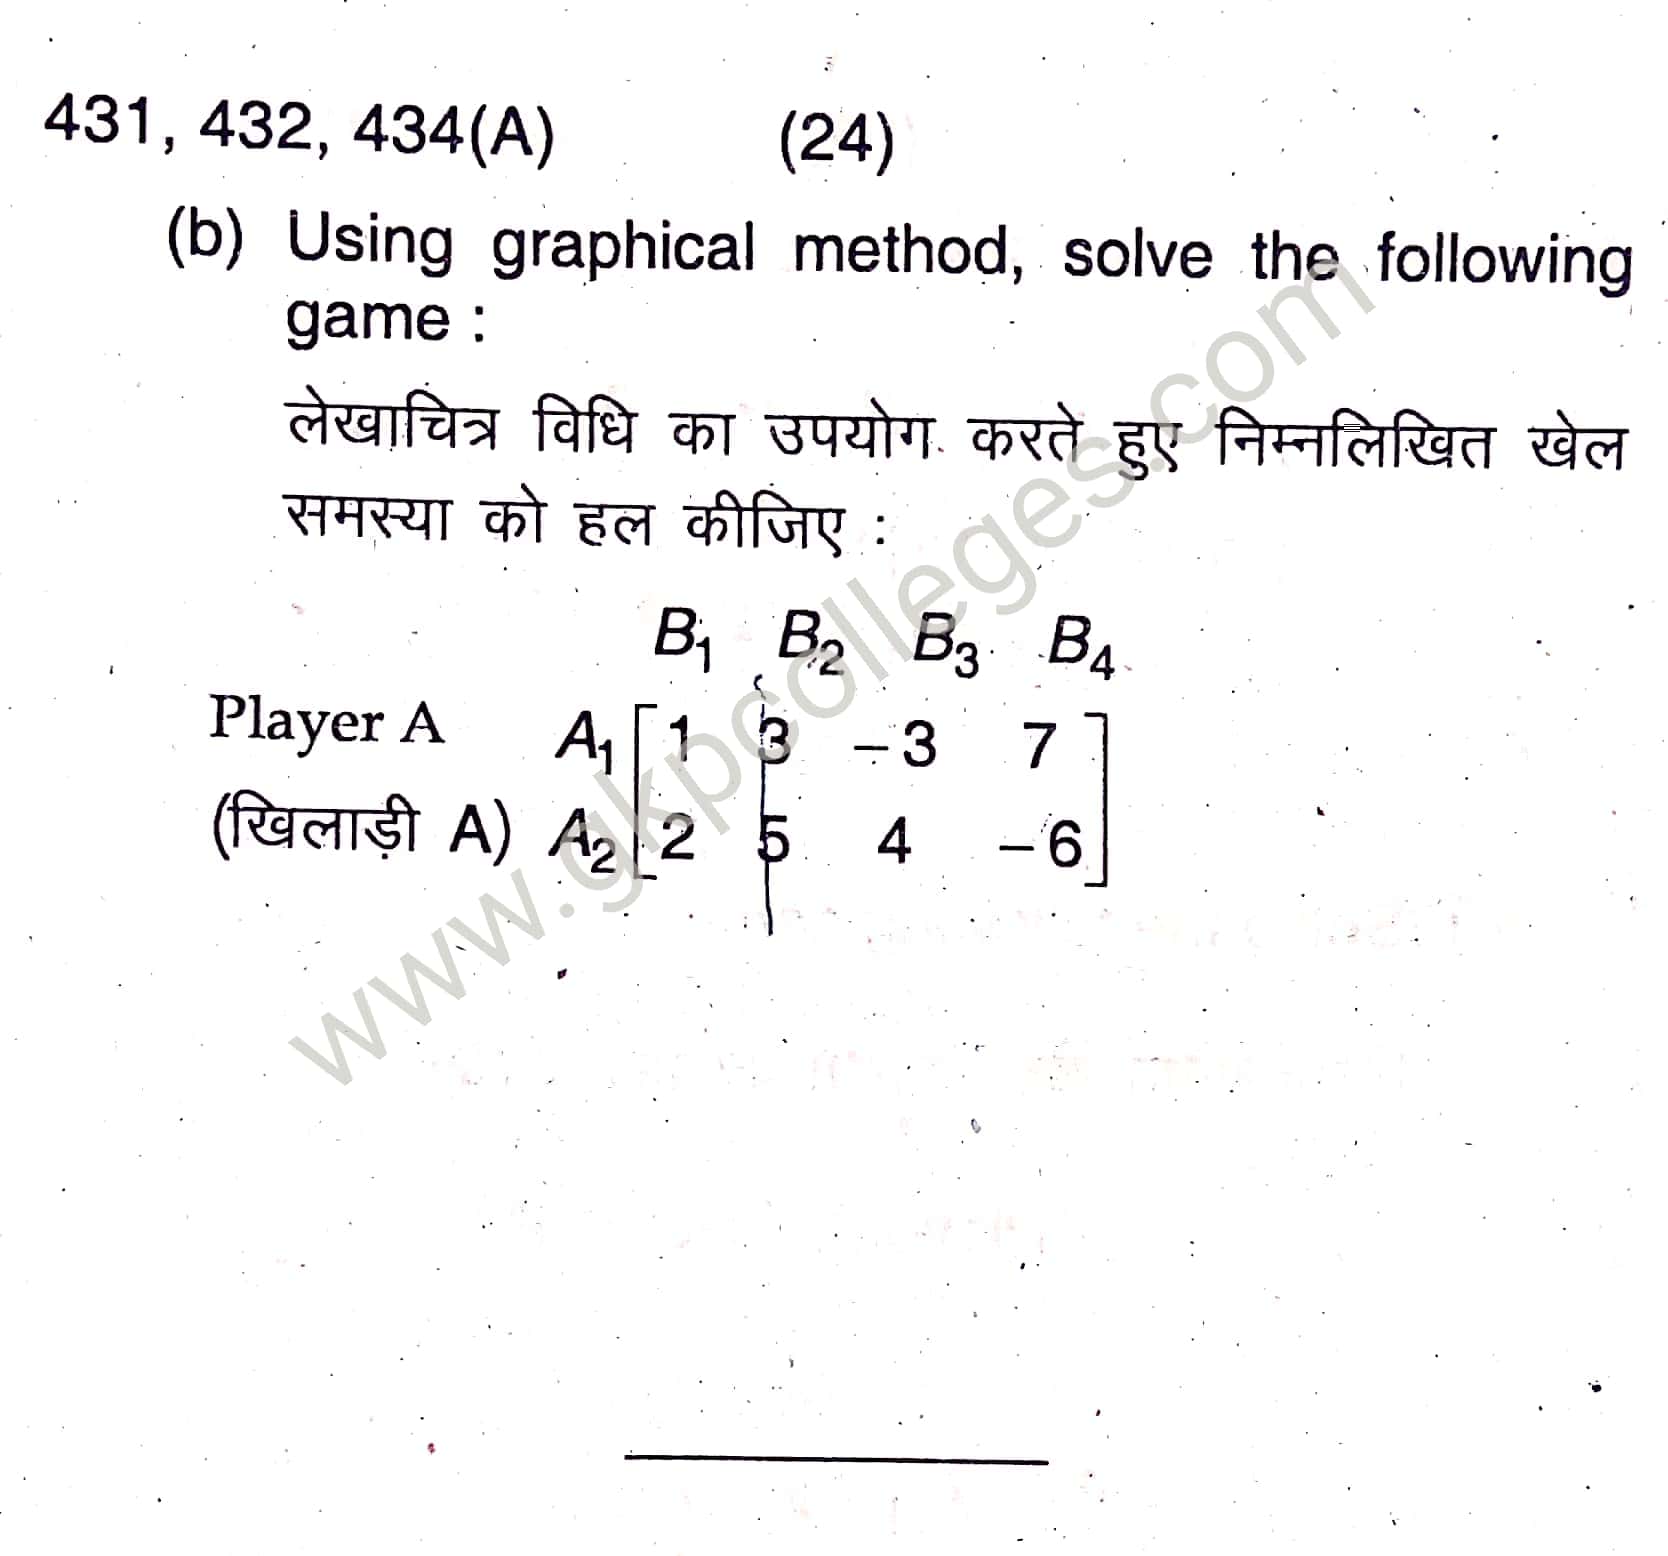 Linear Programming and Game Theory, Mathematics Paper- 5th for B.Sc. 3rd year students, DDU Gorakhpur University Examination 2020